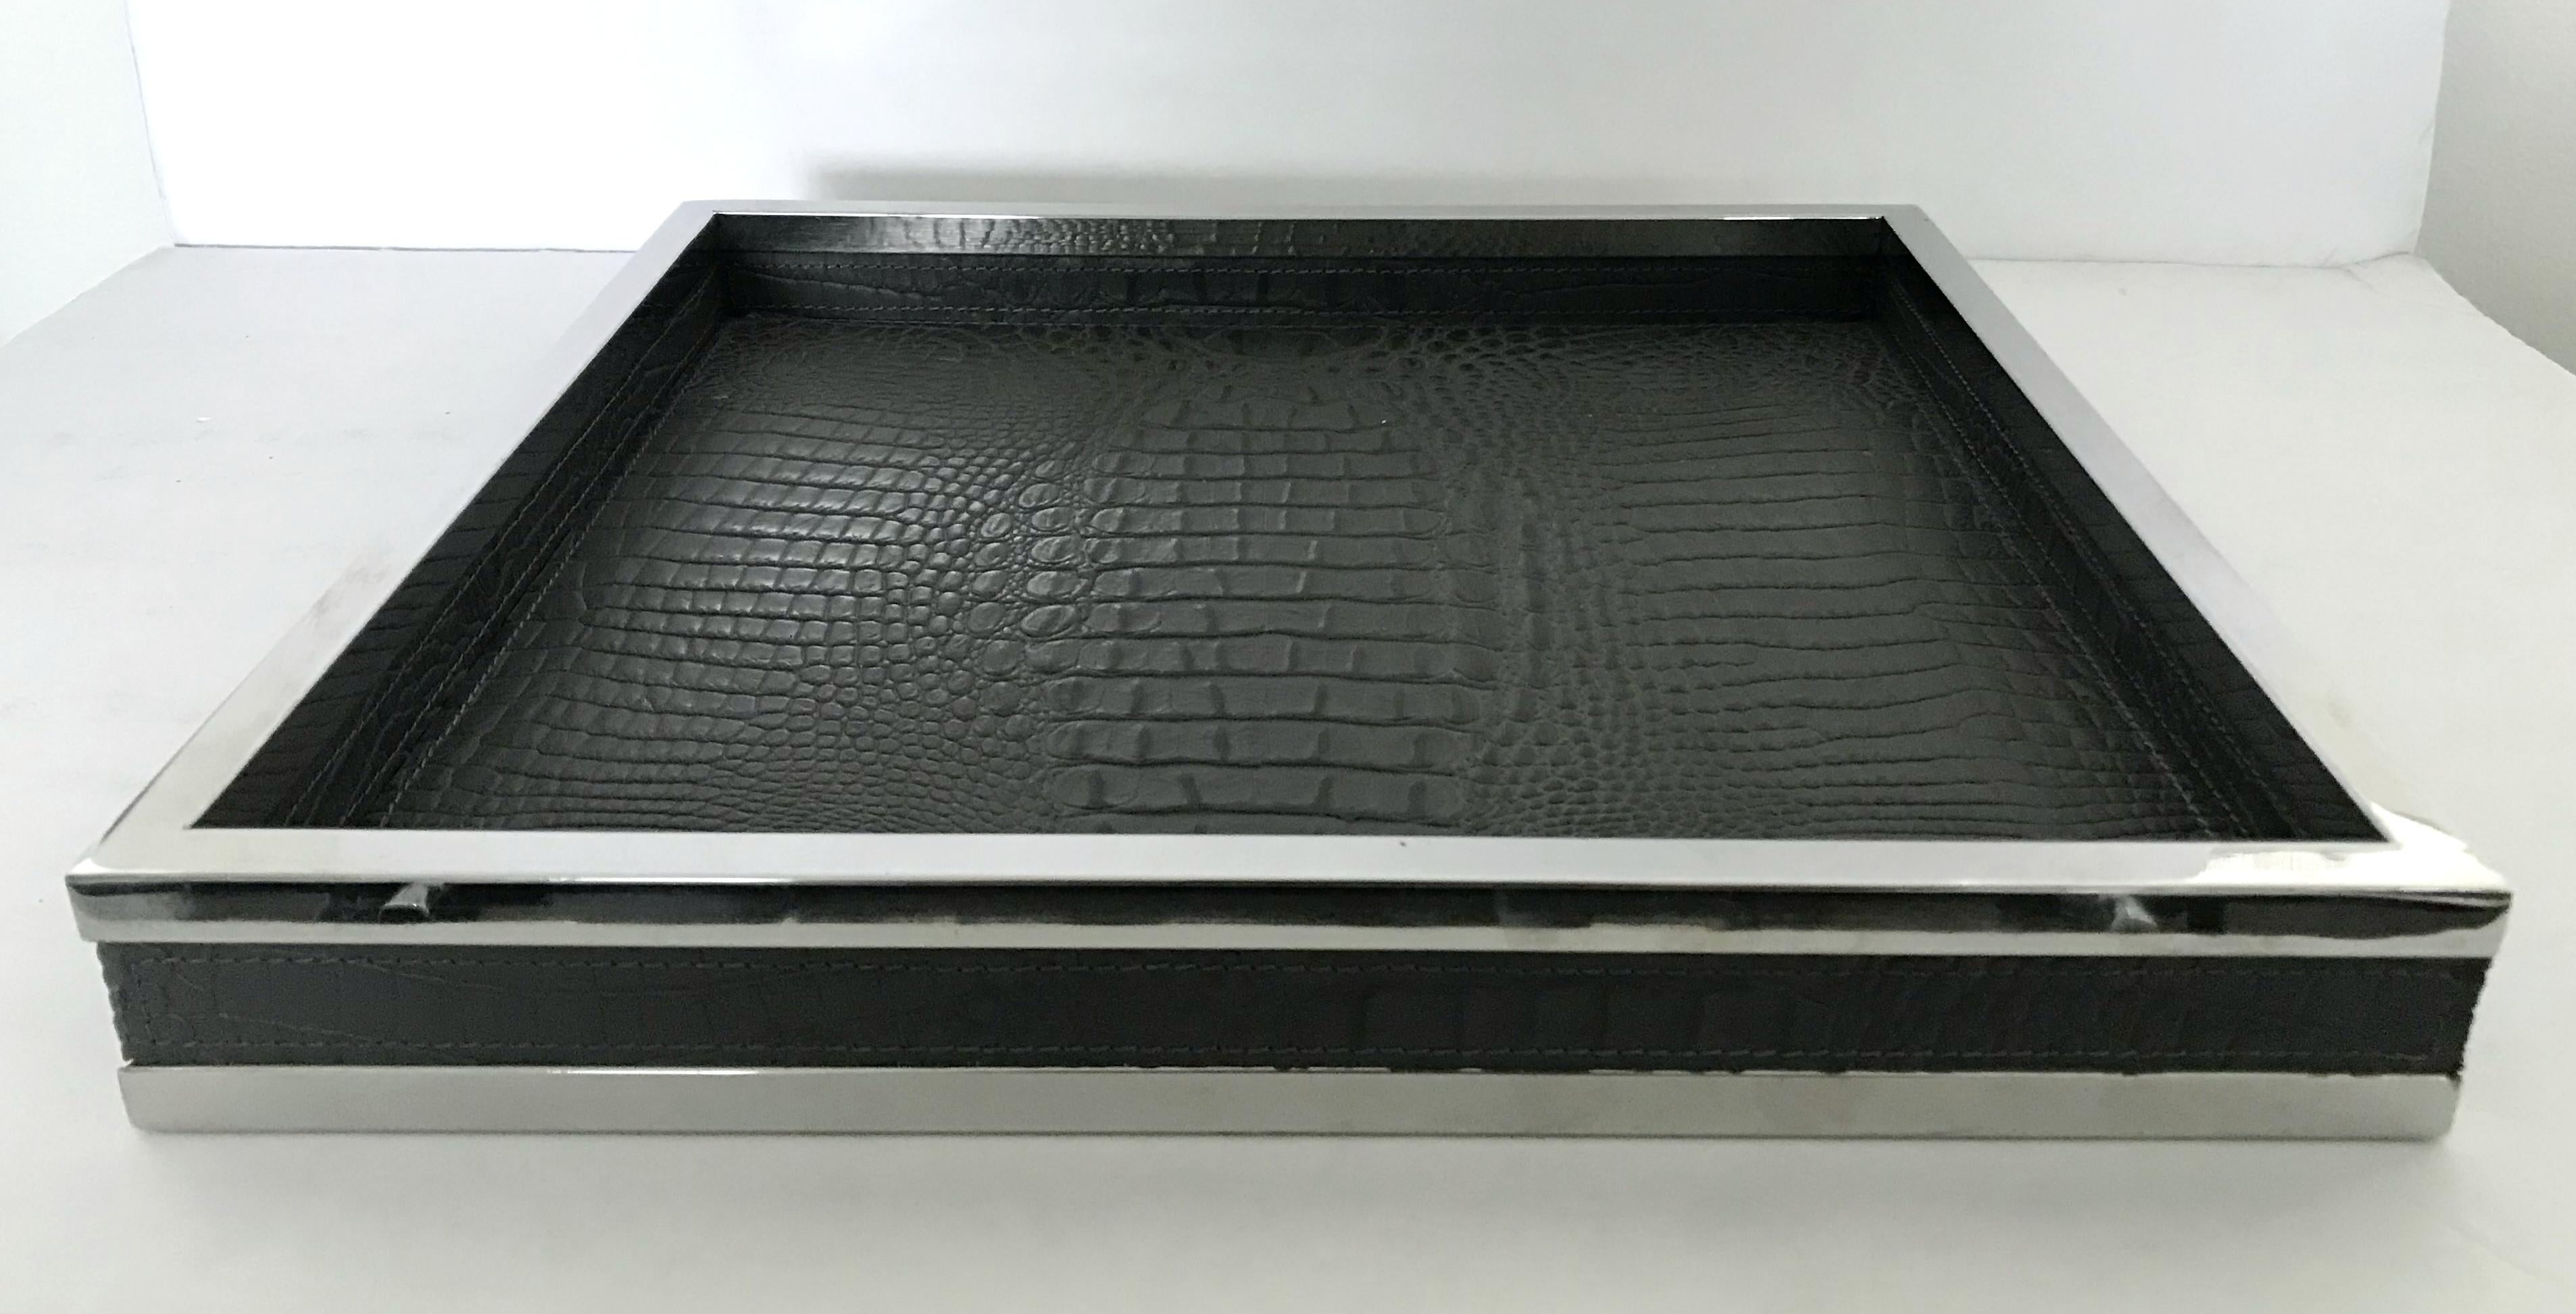 Black leather with pressed crocodile effect and stainless steel tray / Made in Italy
Measures: Length 14 inches, width 14 inches, height 2 inches
1 in stock in Palm Springs ON 20% OFF SALE for $799 !!!
Order reference #: FABIOLTD F224
This piece